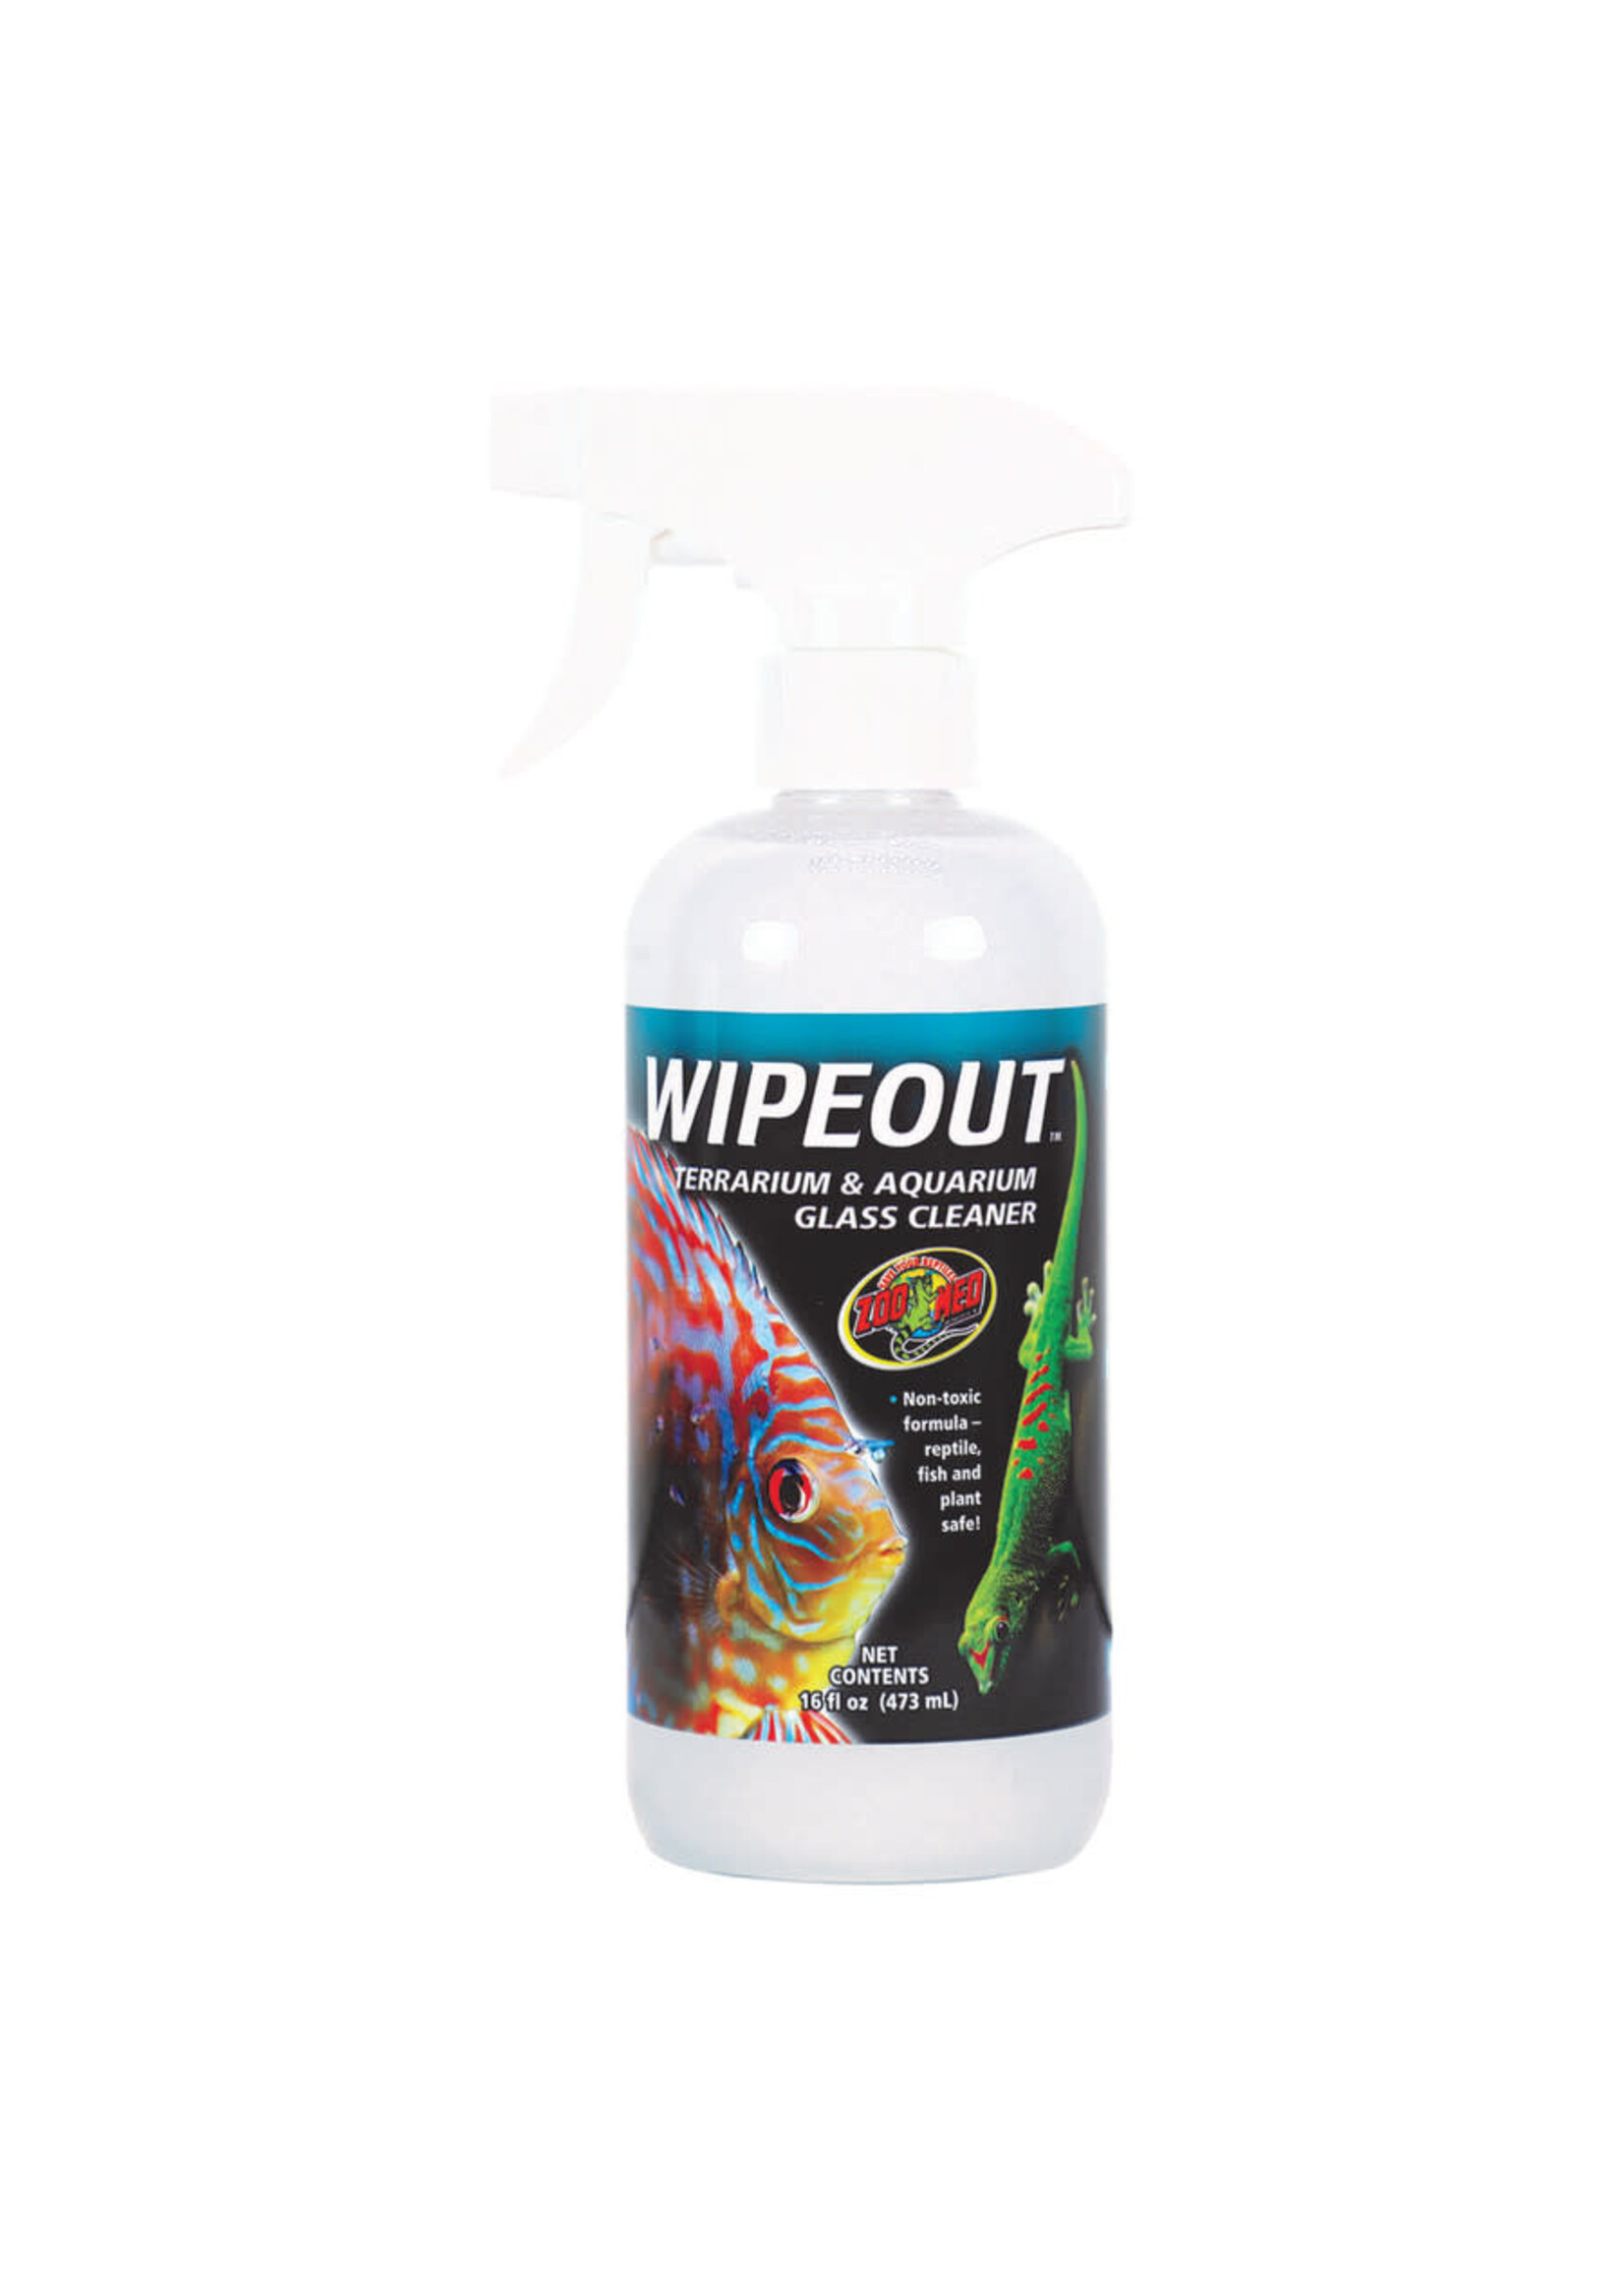 Zoo Med WIPE OUT TERRARIUM & GLASS CLEANER